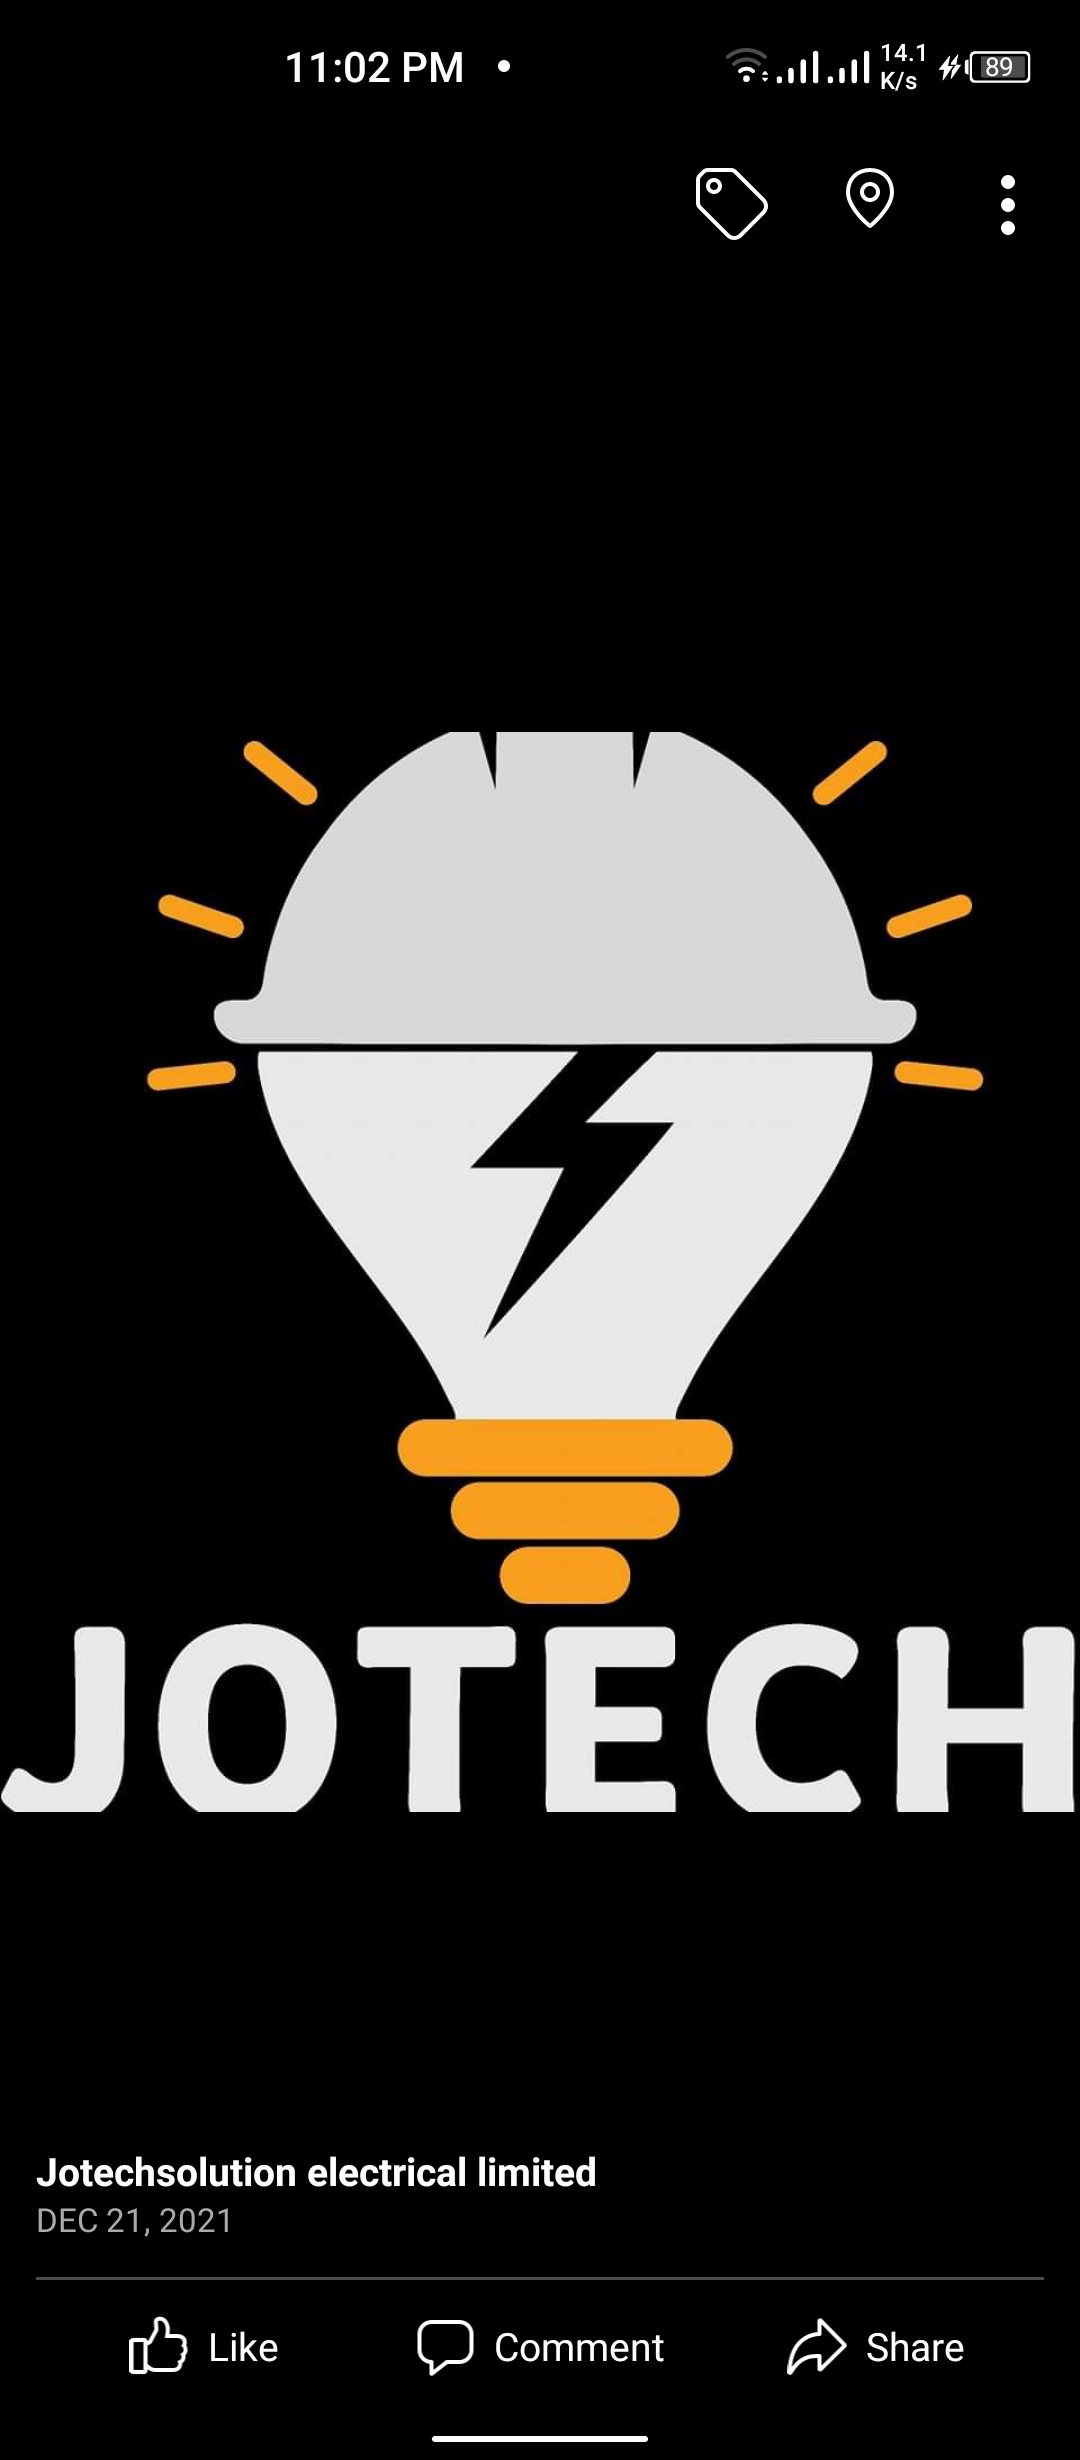 jotechsolution electrical limited provider